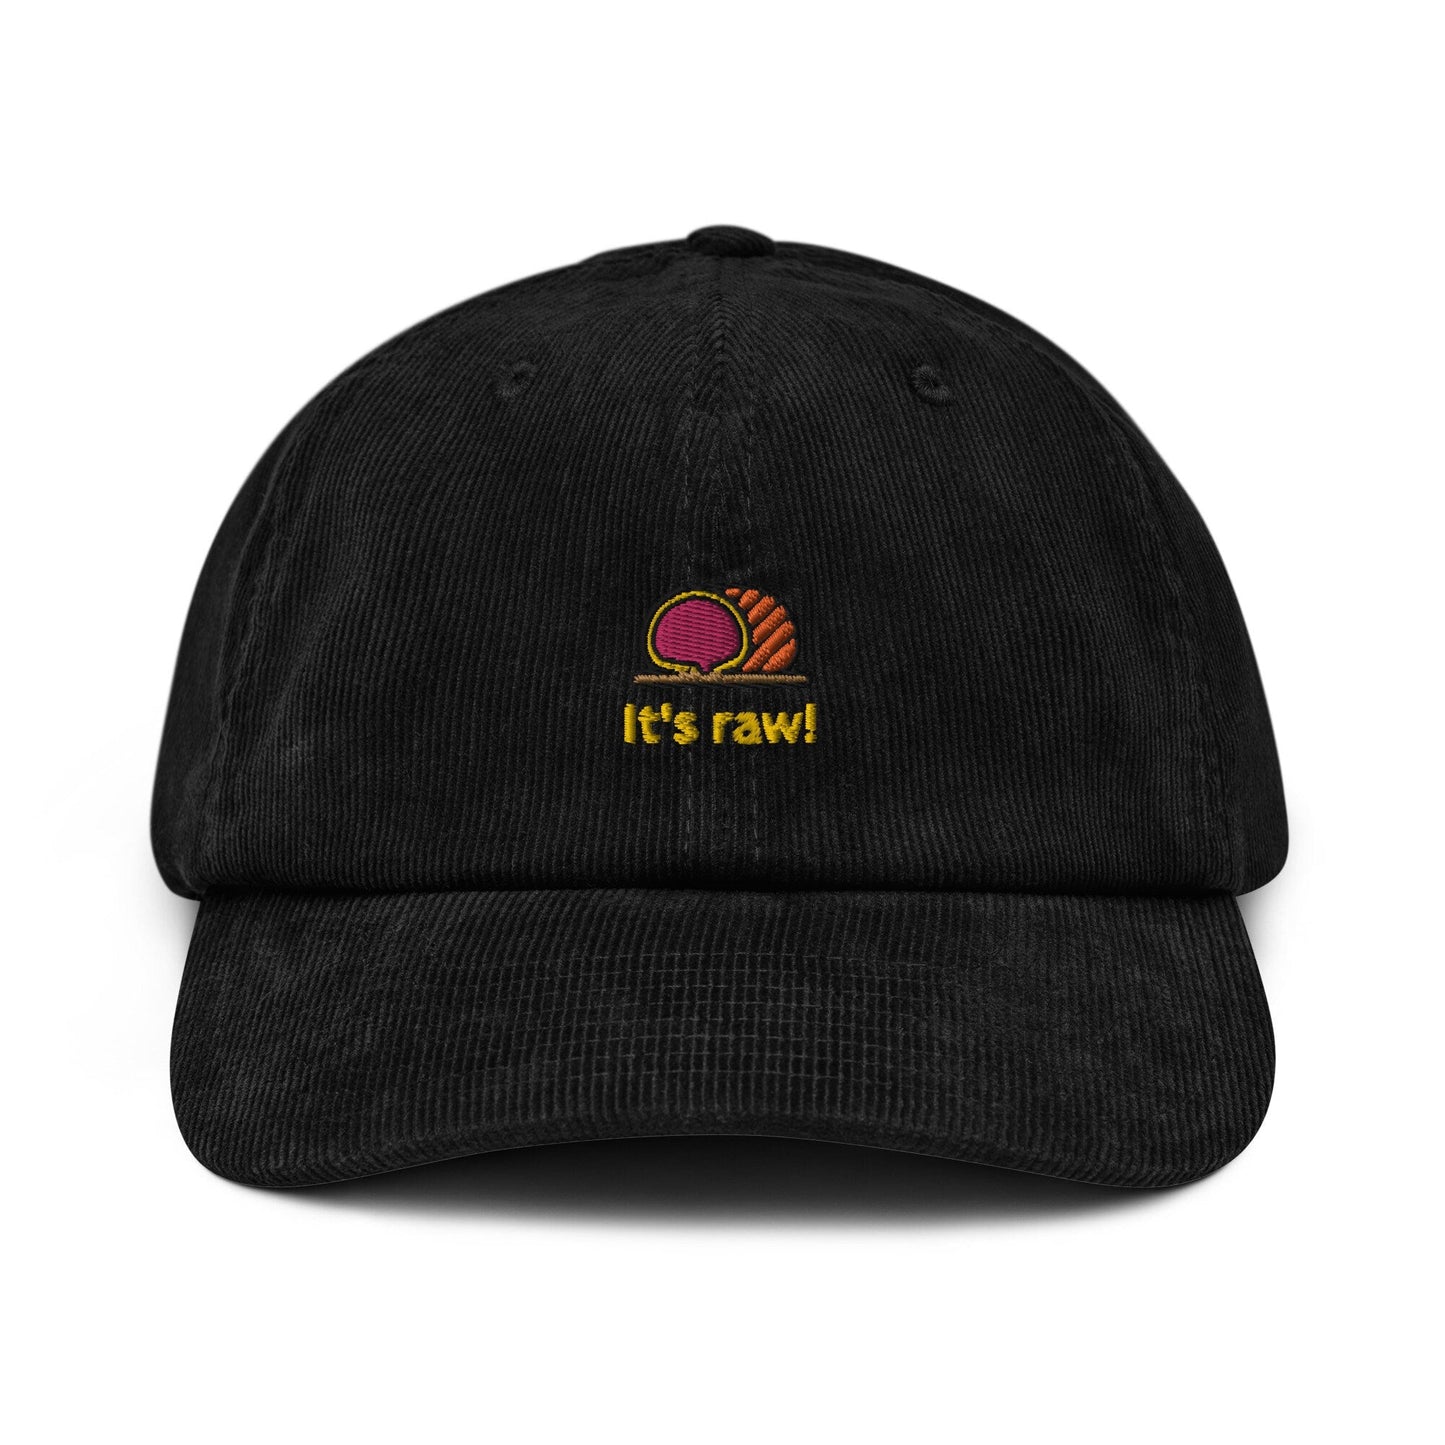 Beef Wellington Corduroy Hat - Gift for Gordon Ramsay and Hell's Kitchen Fans - Handmade embroidered cap - Evilwater Originals